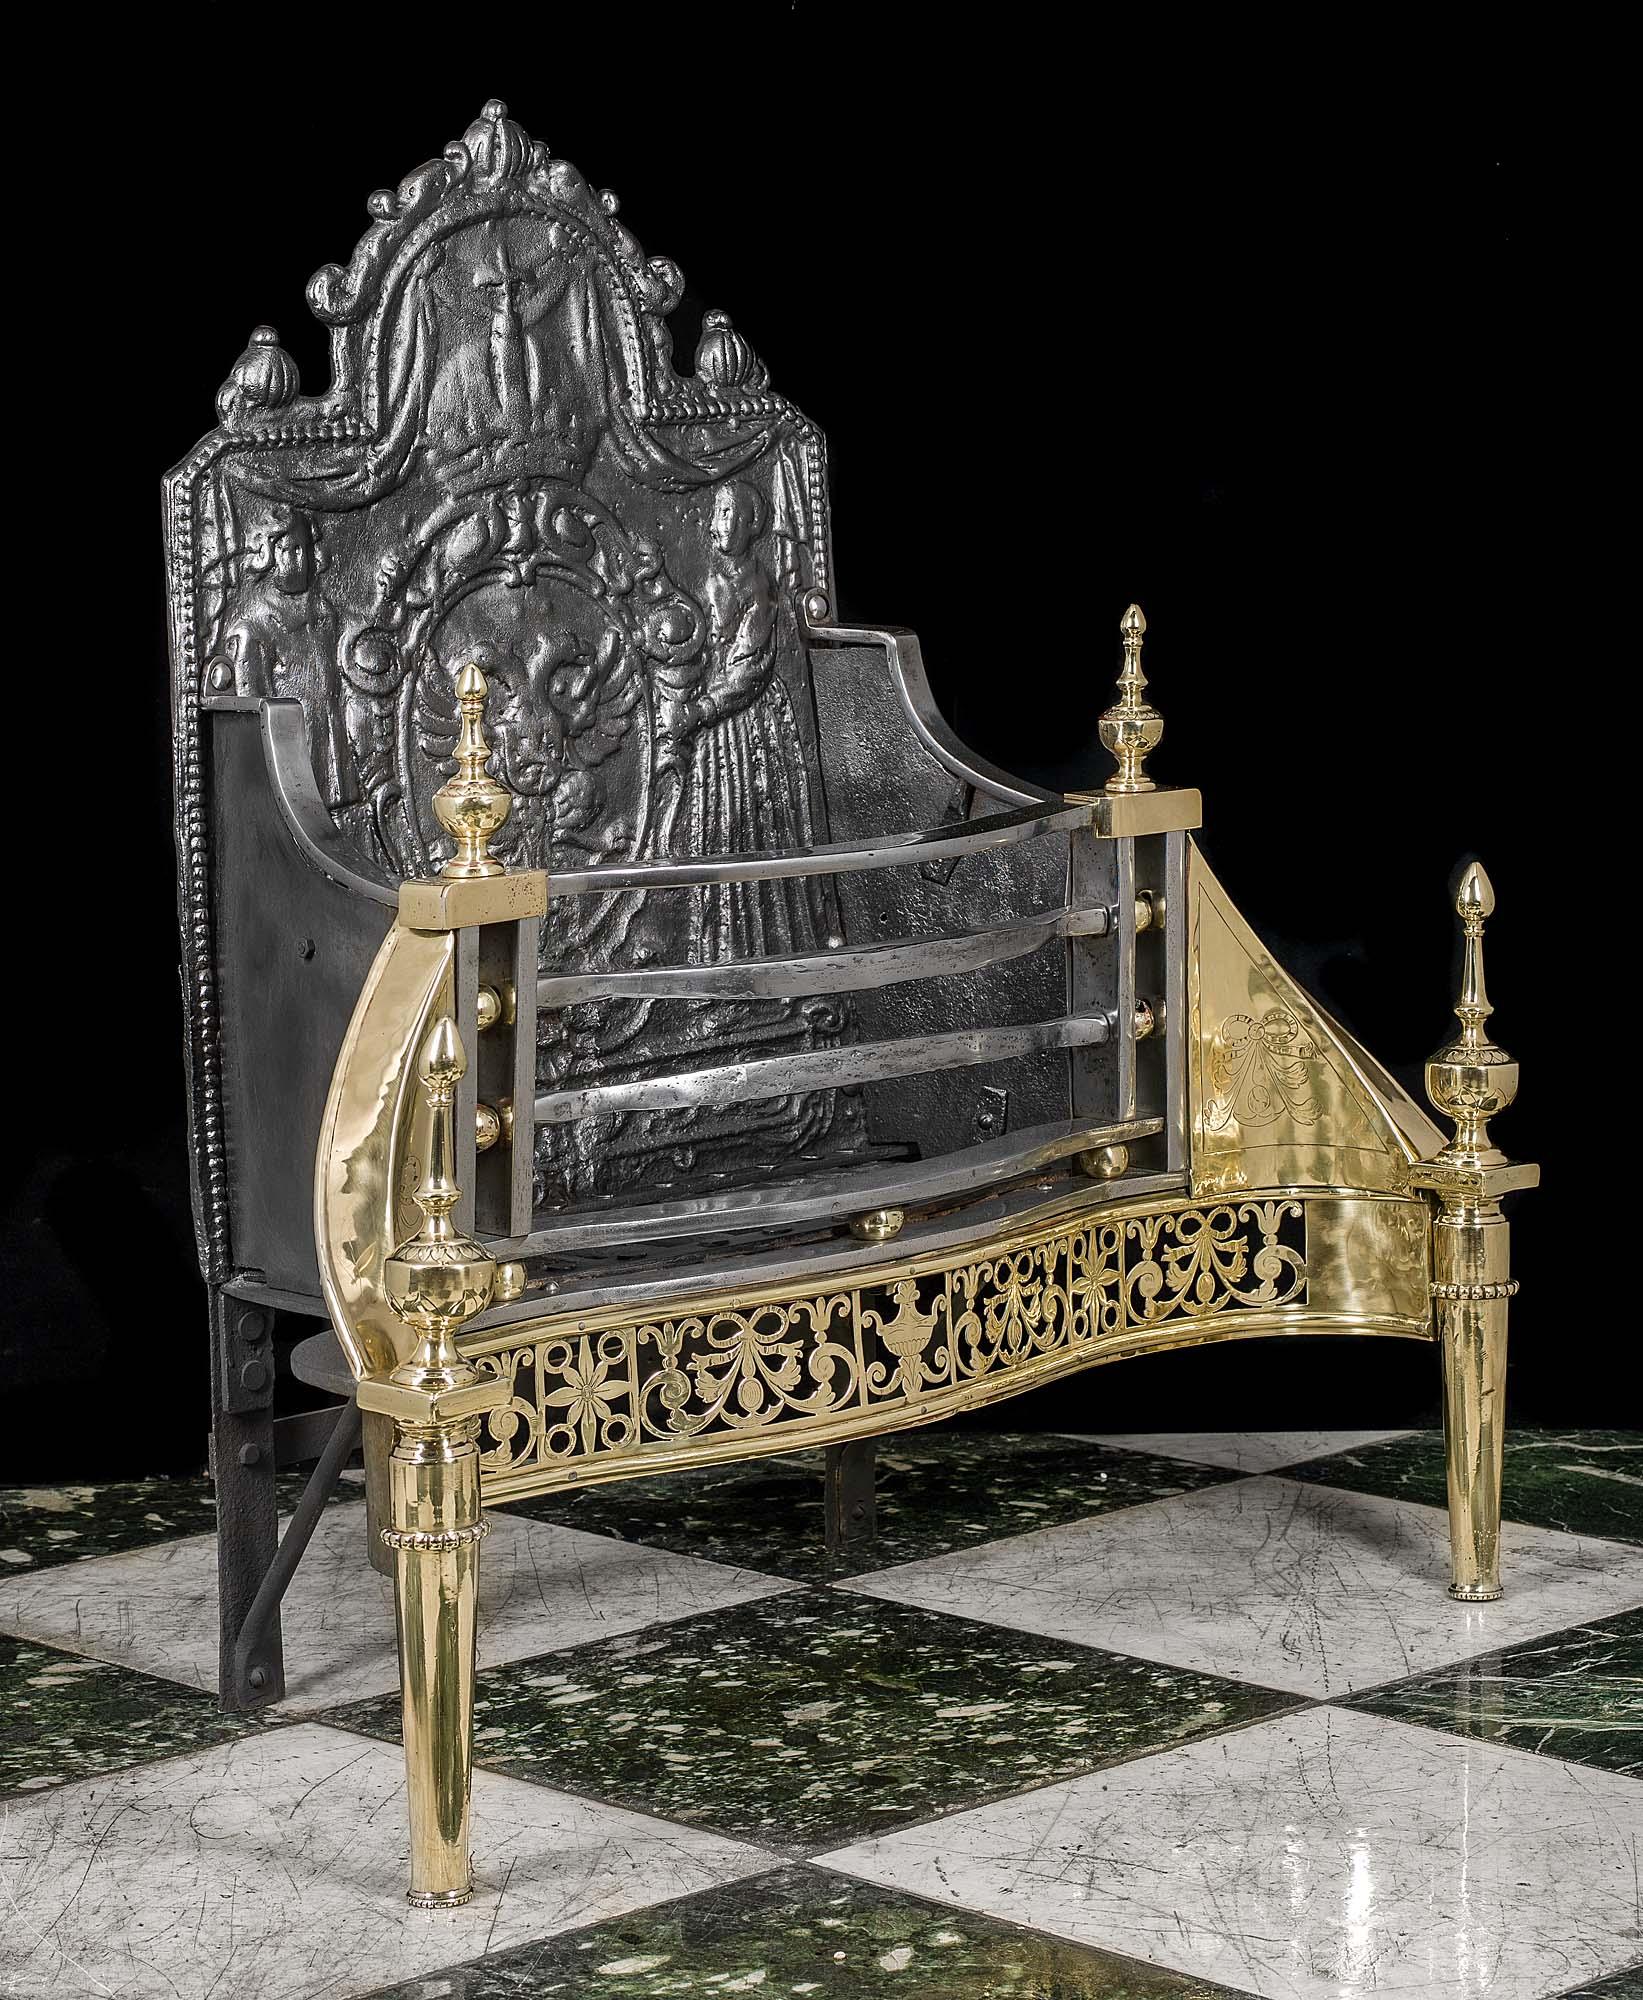 A fine iron and brass fire grate in the late Georgian style. The high shaped back with a central cartouche of Russian influence, with a double headed eagle beneath a crown, is held by 17th century figures. The shaped front bars of the grate, above a